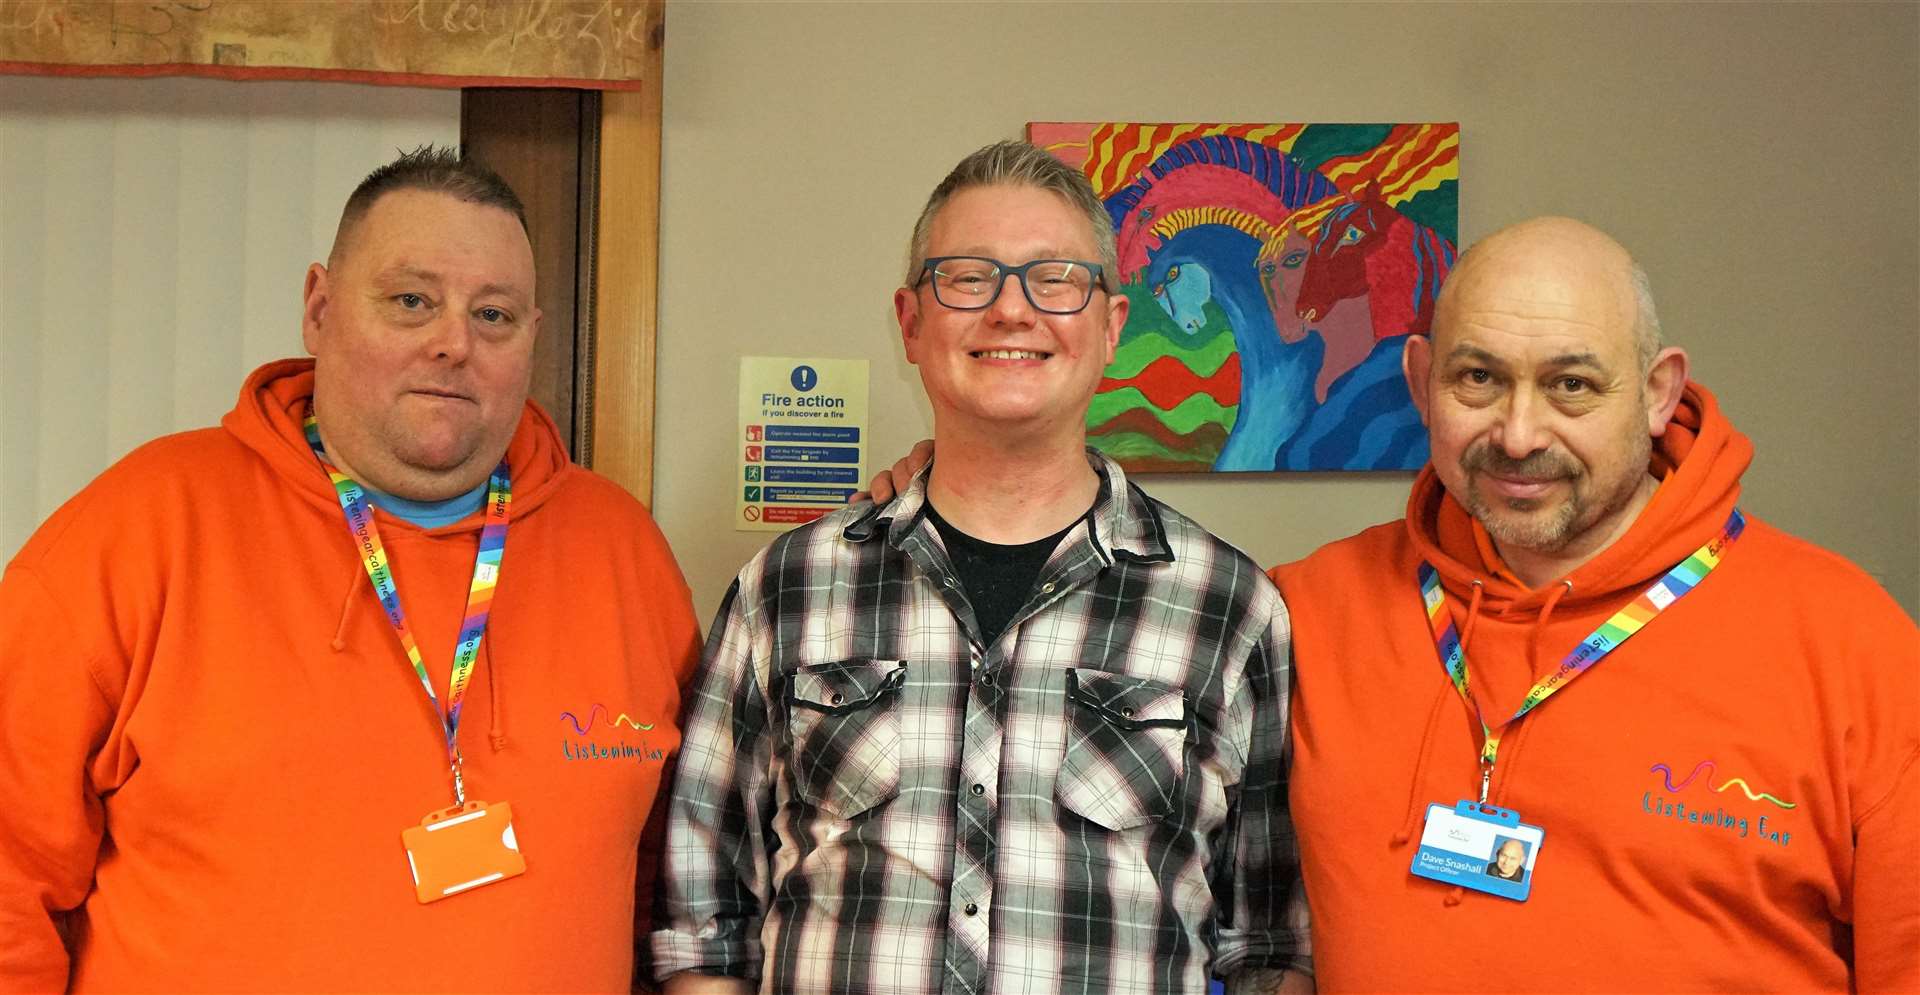 Baby-faced Ryan shows a more youthful side after being shaved many agreed. From left, Mark Boulton (project officer at Listening Ear Caithness), beardless Ryan Buttress, and Davie Snashall (outreach development manager with Listening Ear Caithness). Picture: DGS